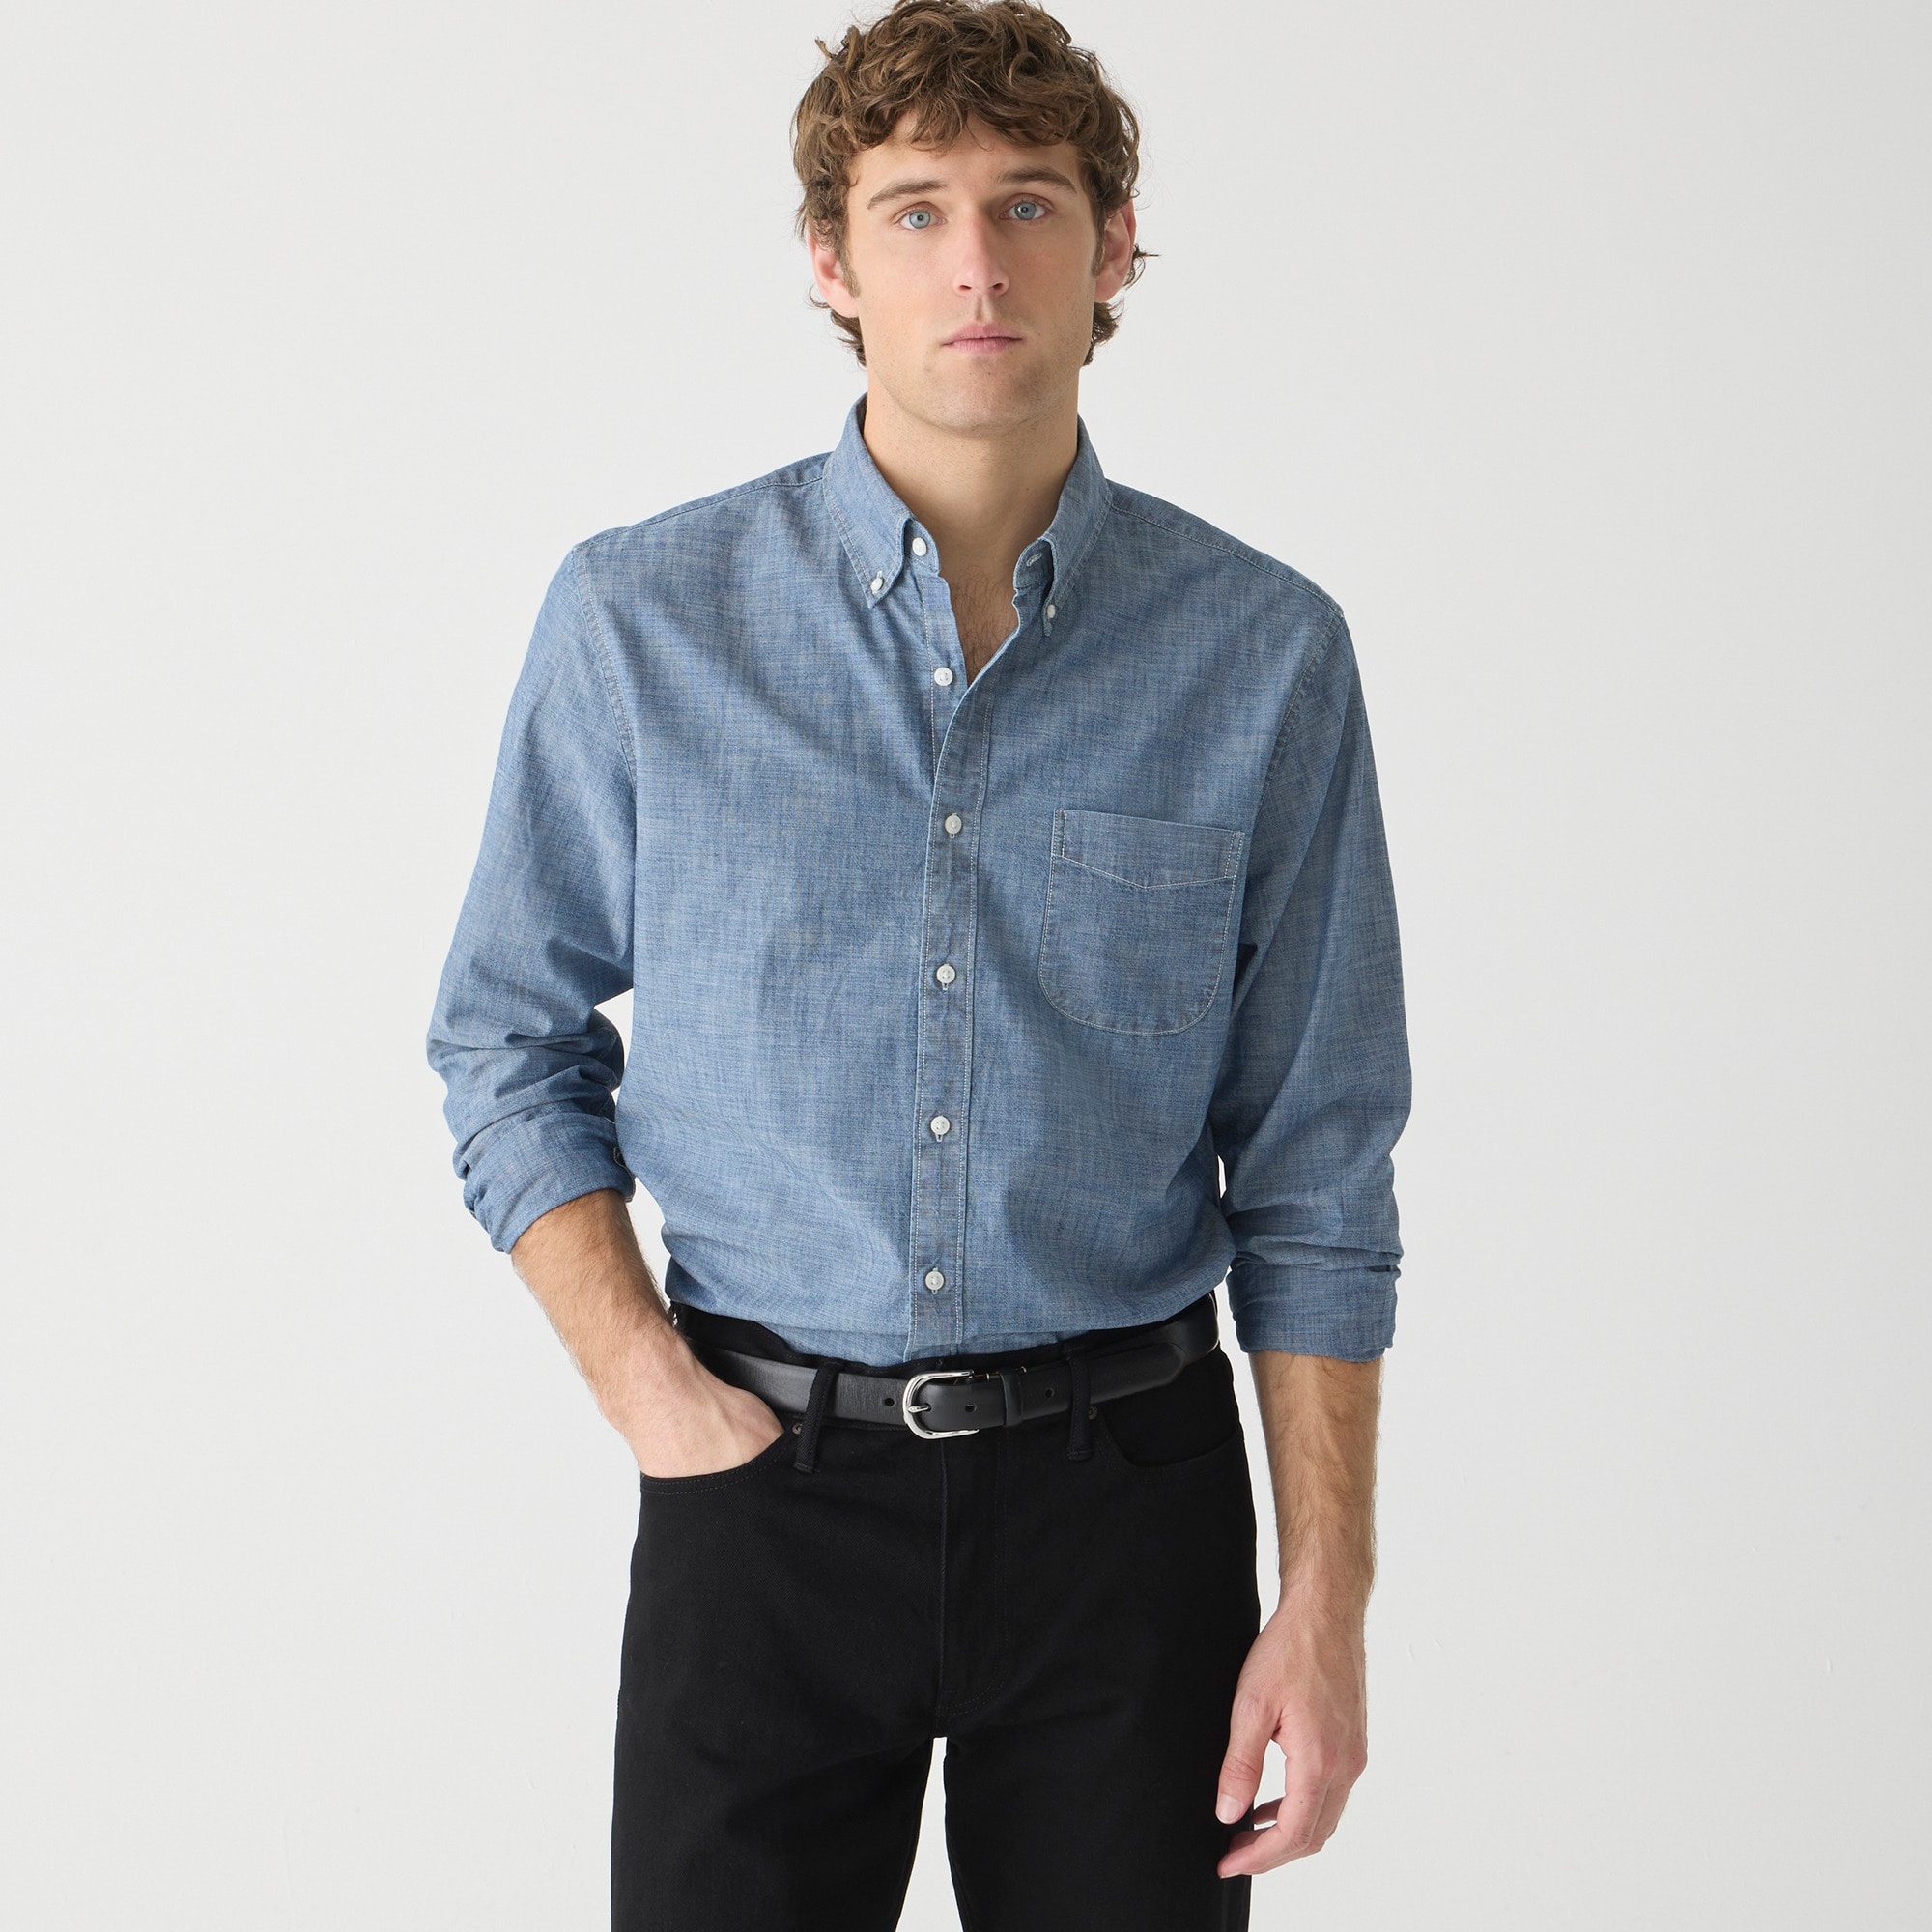  Tall organic cotton chambray shirt in one-year wash